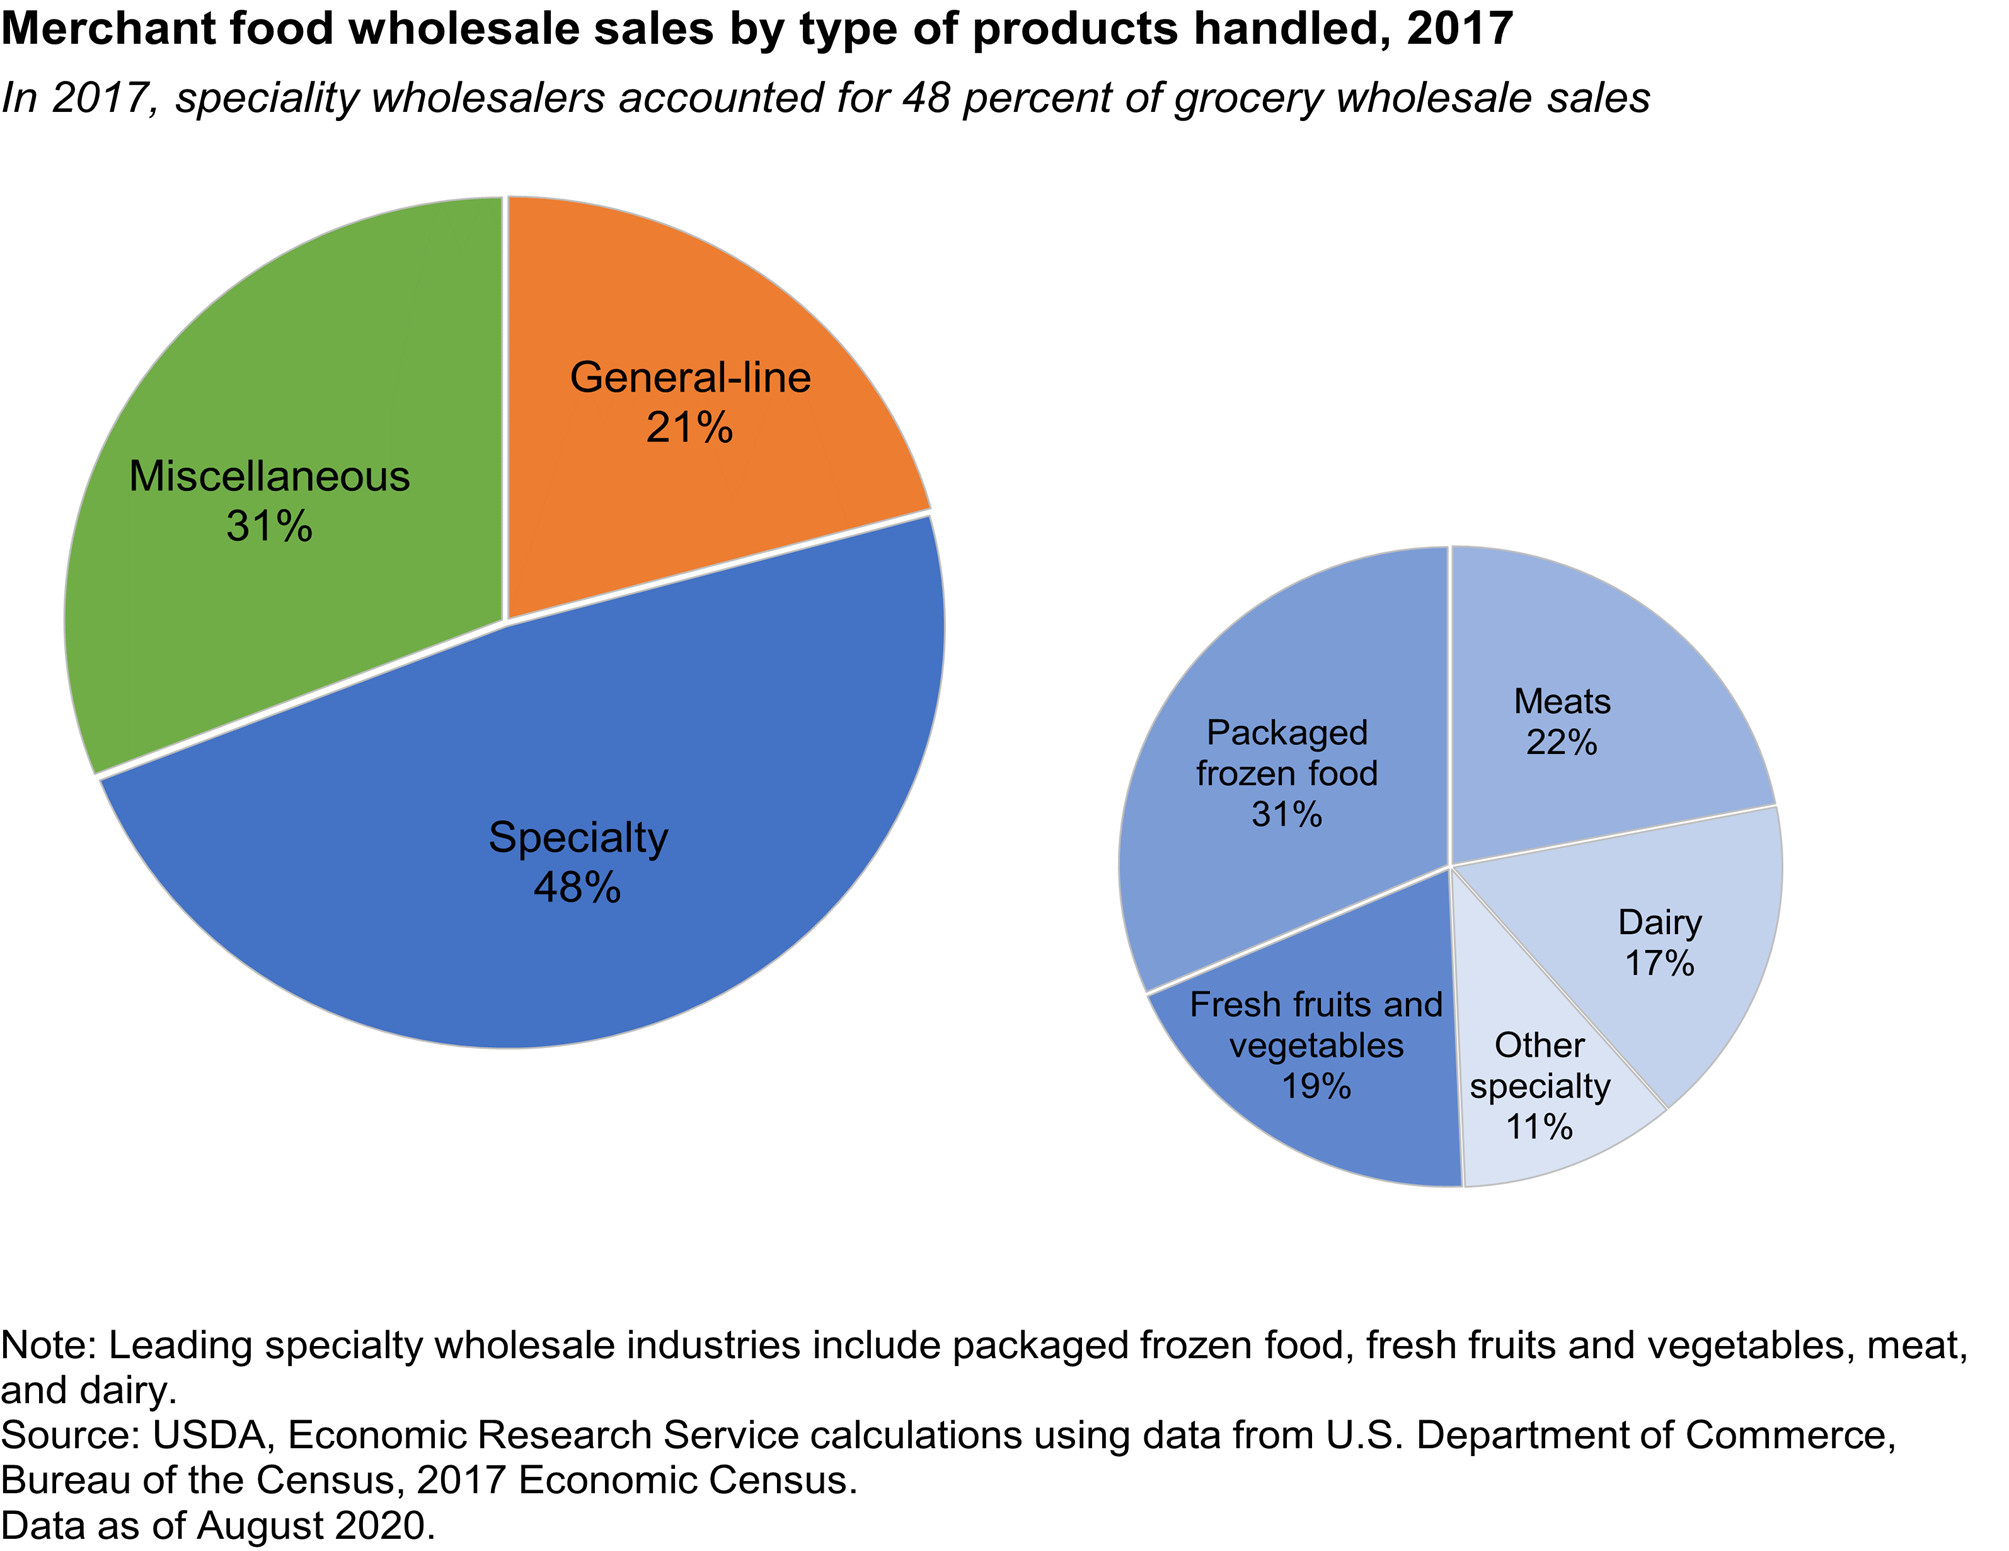 https://www.ers.usda.gov/webdocs/charts/54650/typeofproducts_ers.png?v=1186.3